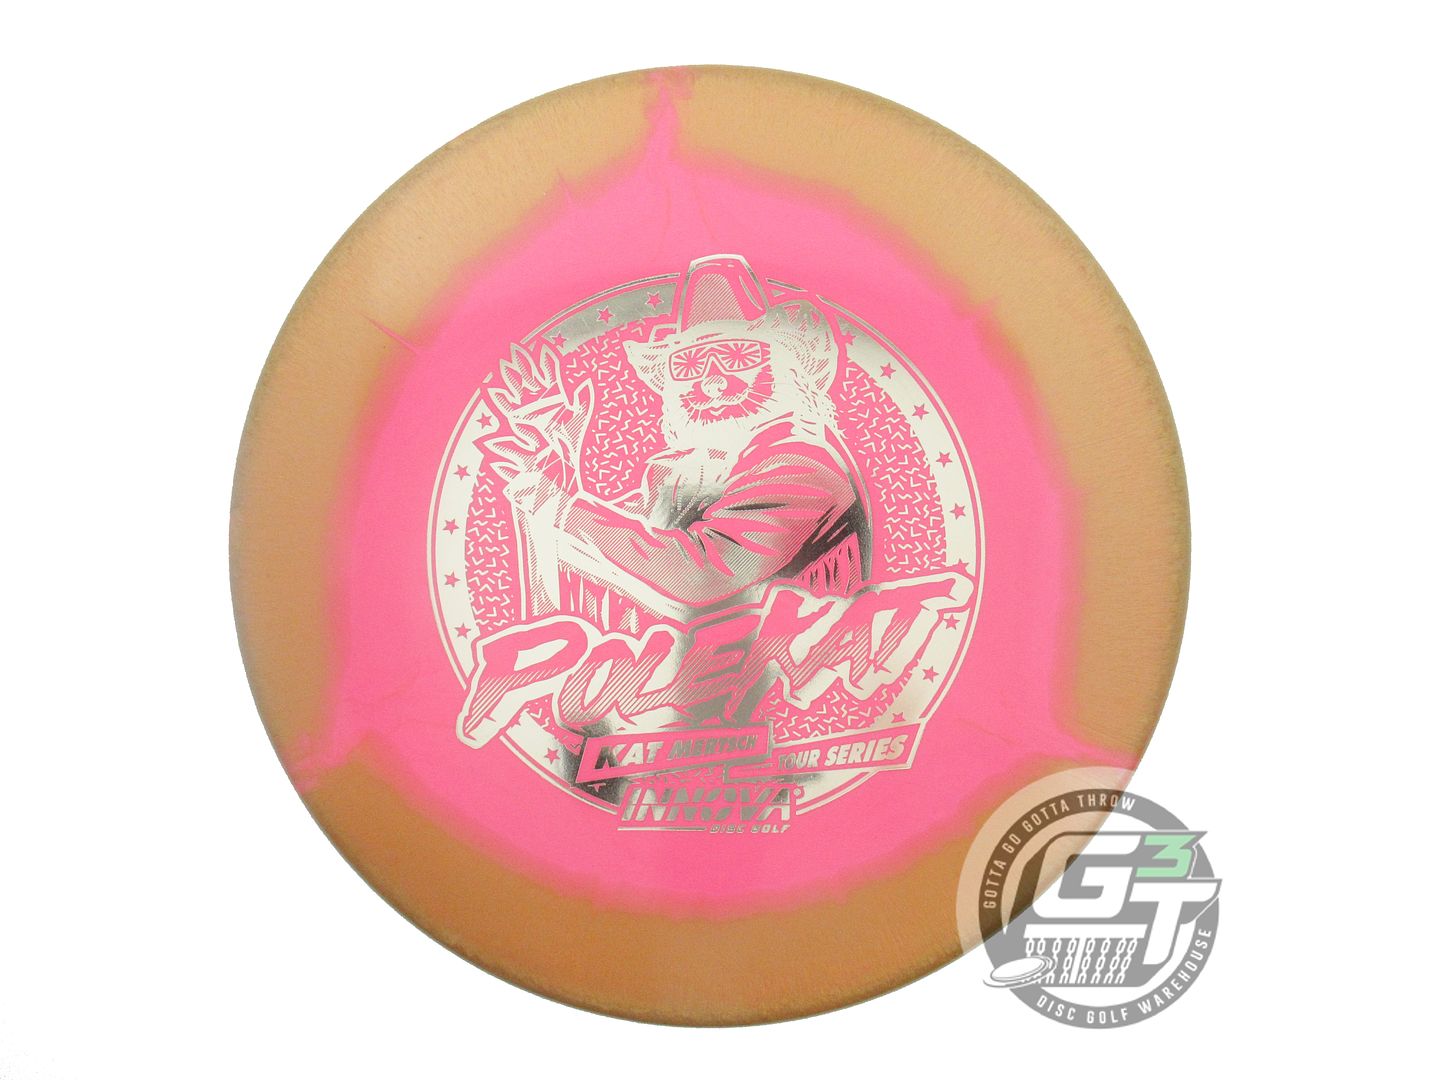 Innova Limited Edition 2024 Tour Series Kat Mertsch Halo Star Polecat Putter Golf Disc (Individually Listed)